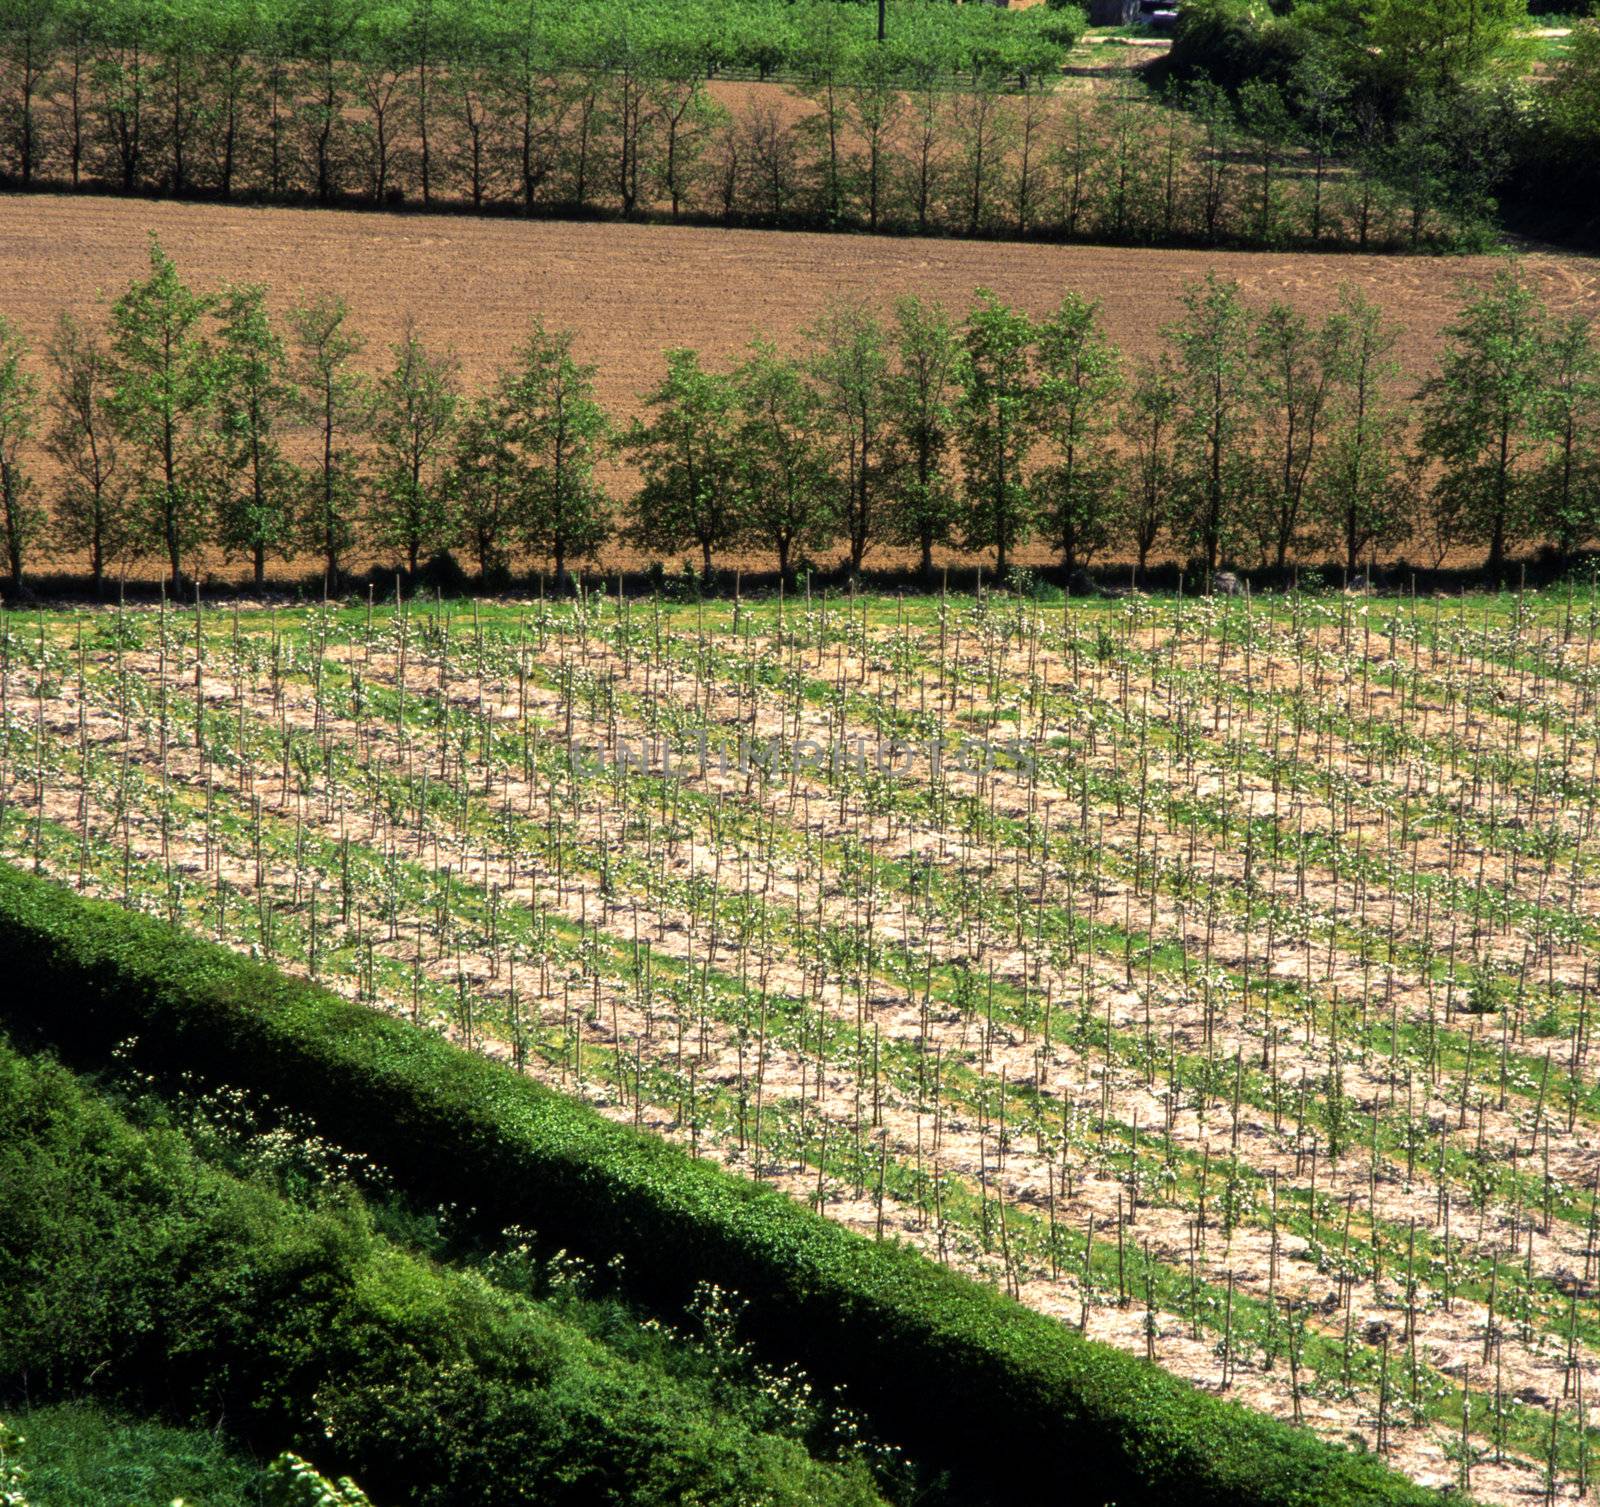 Young trees growing in a field of a tree farm